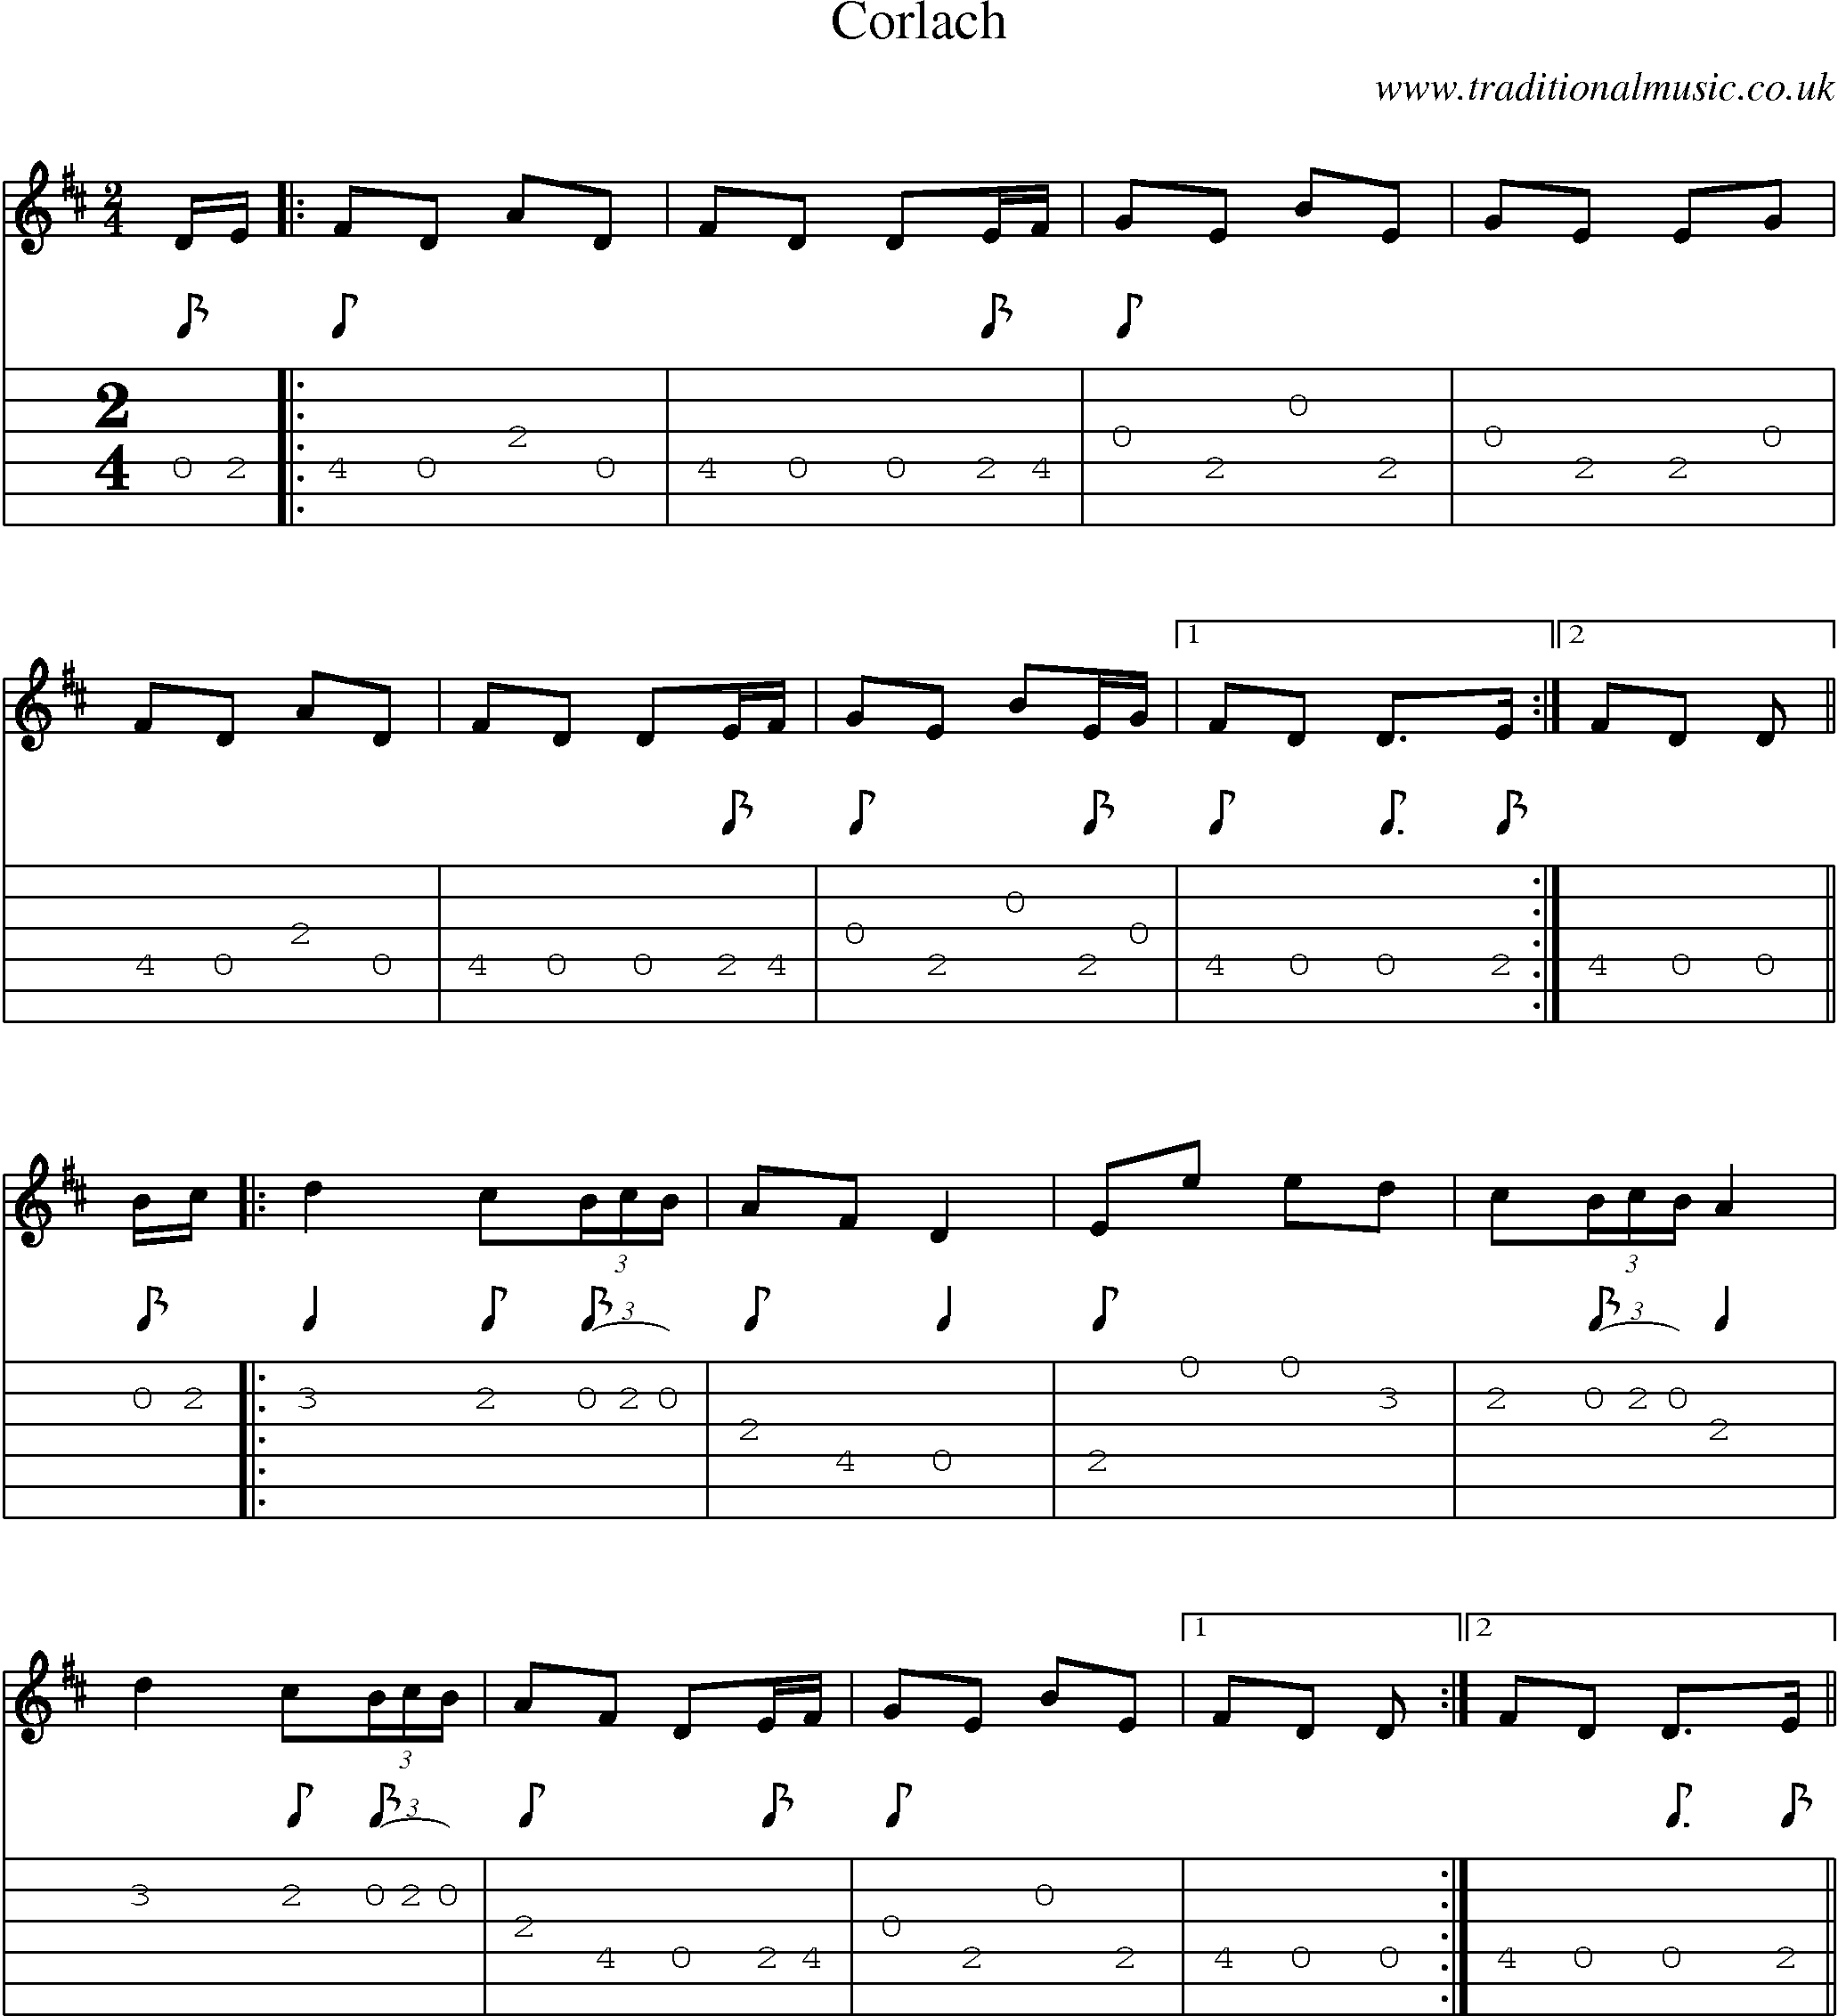 Music Score and Guitar Tabs for Corlach